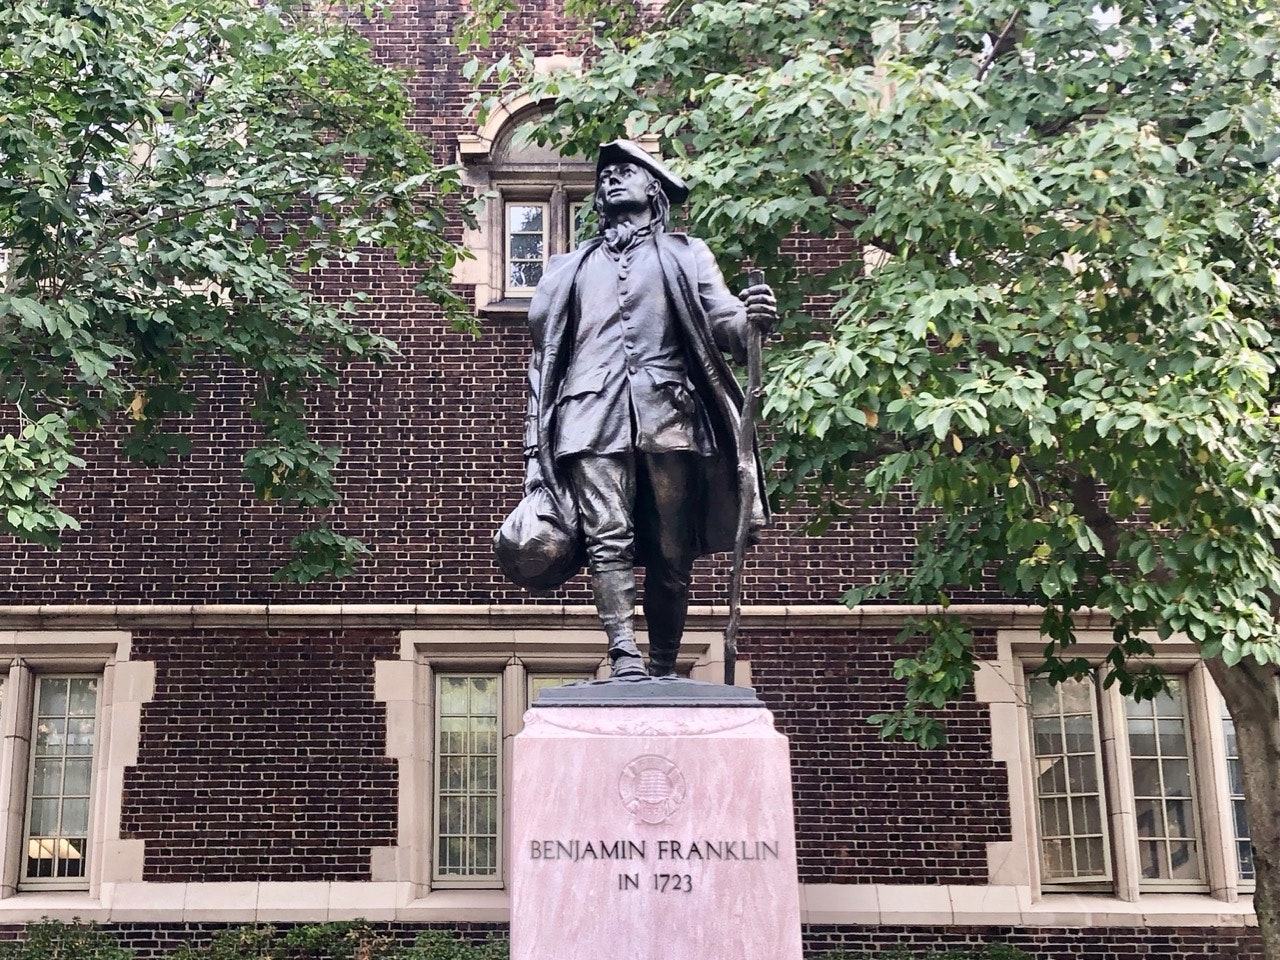 A statue of Benjamin Franklin in 1723, on the University of Pennsylvania campus